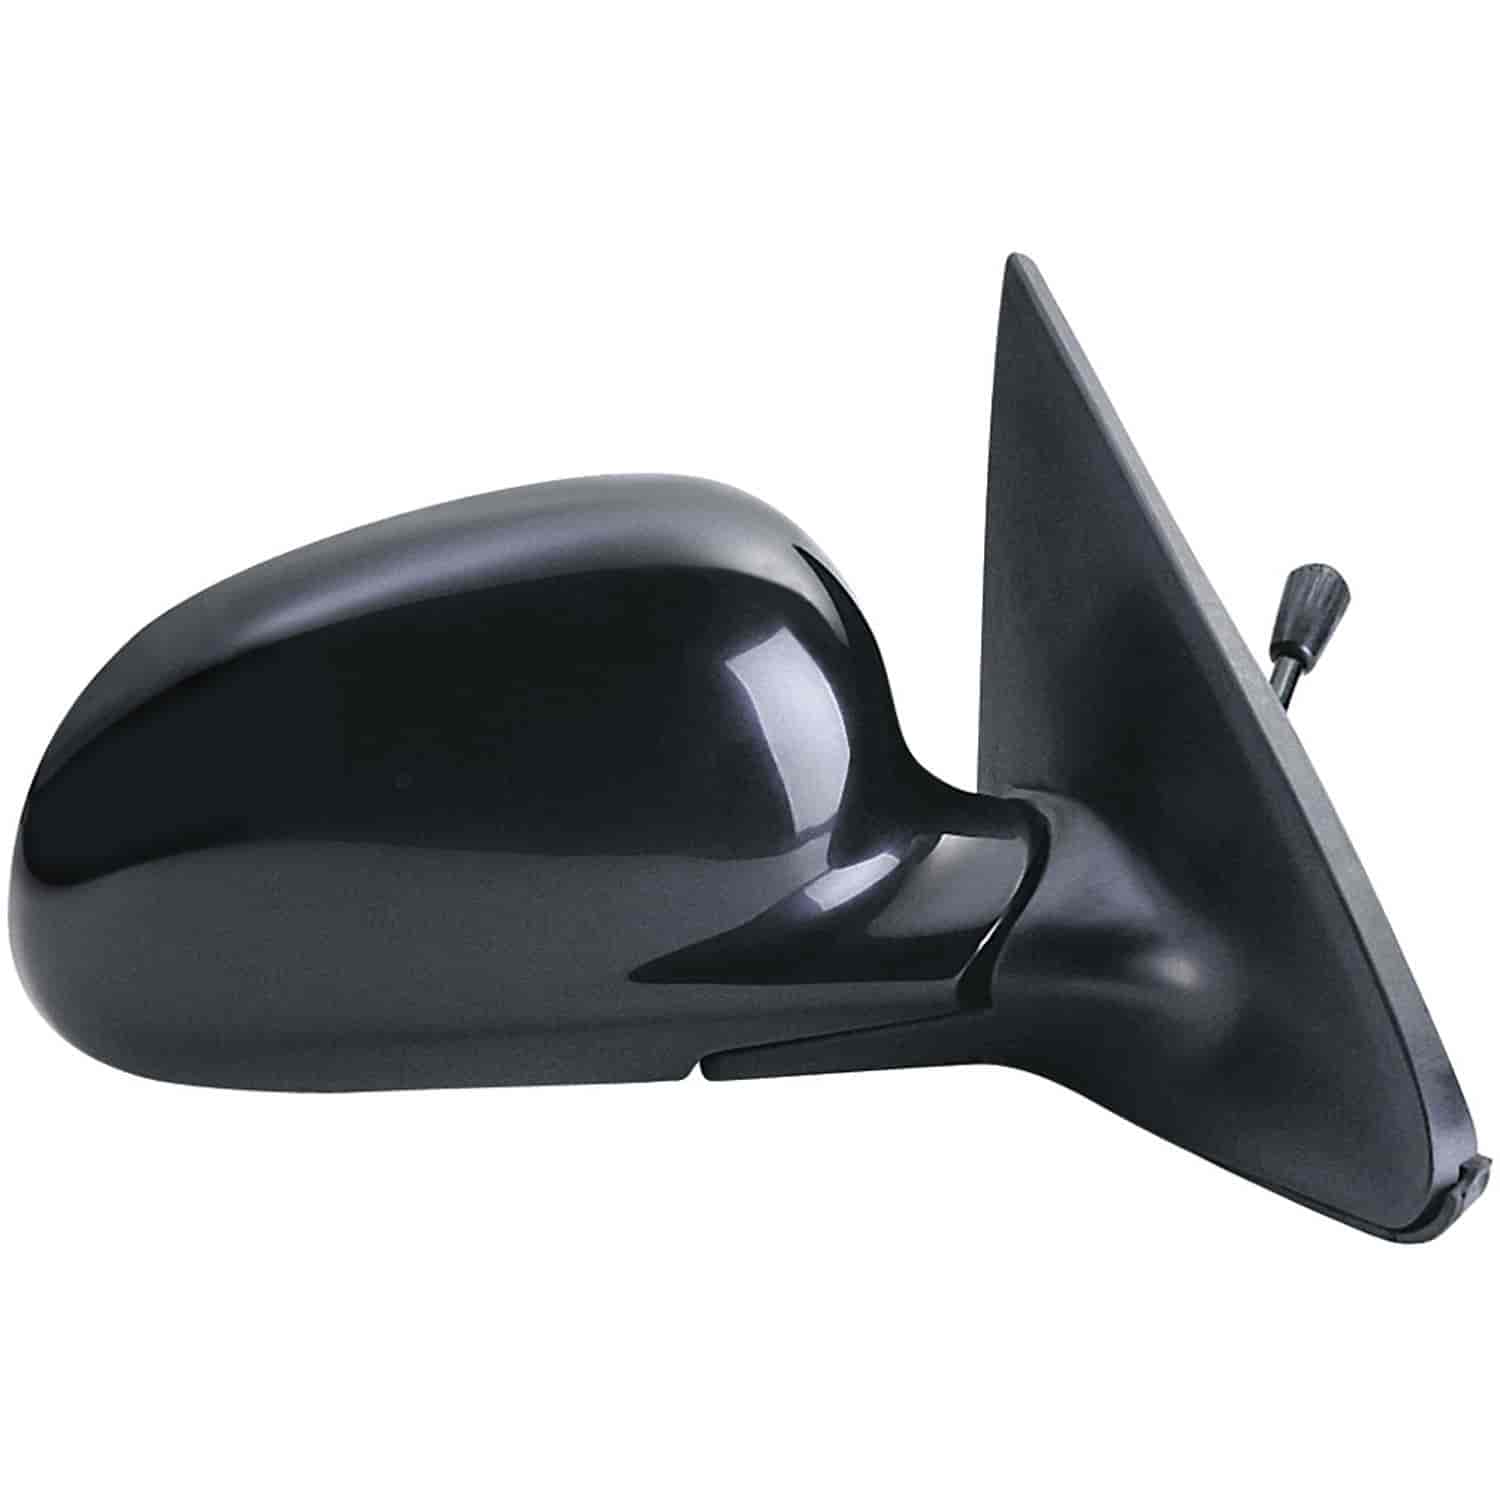 OEM Style Replacement mirror for 92-95 Honda Civic Hatchback/Coupe passenger side mirror tested to f